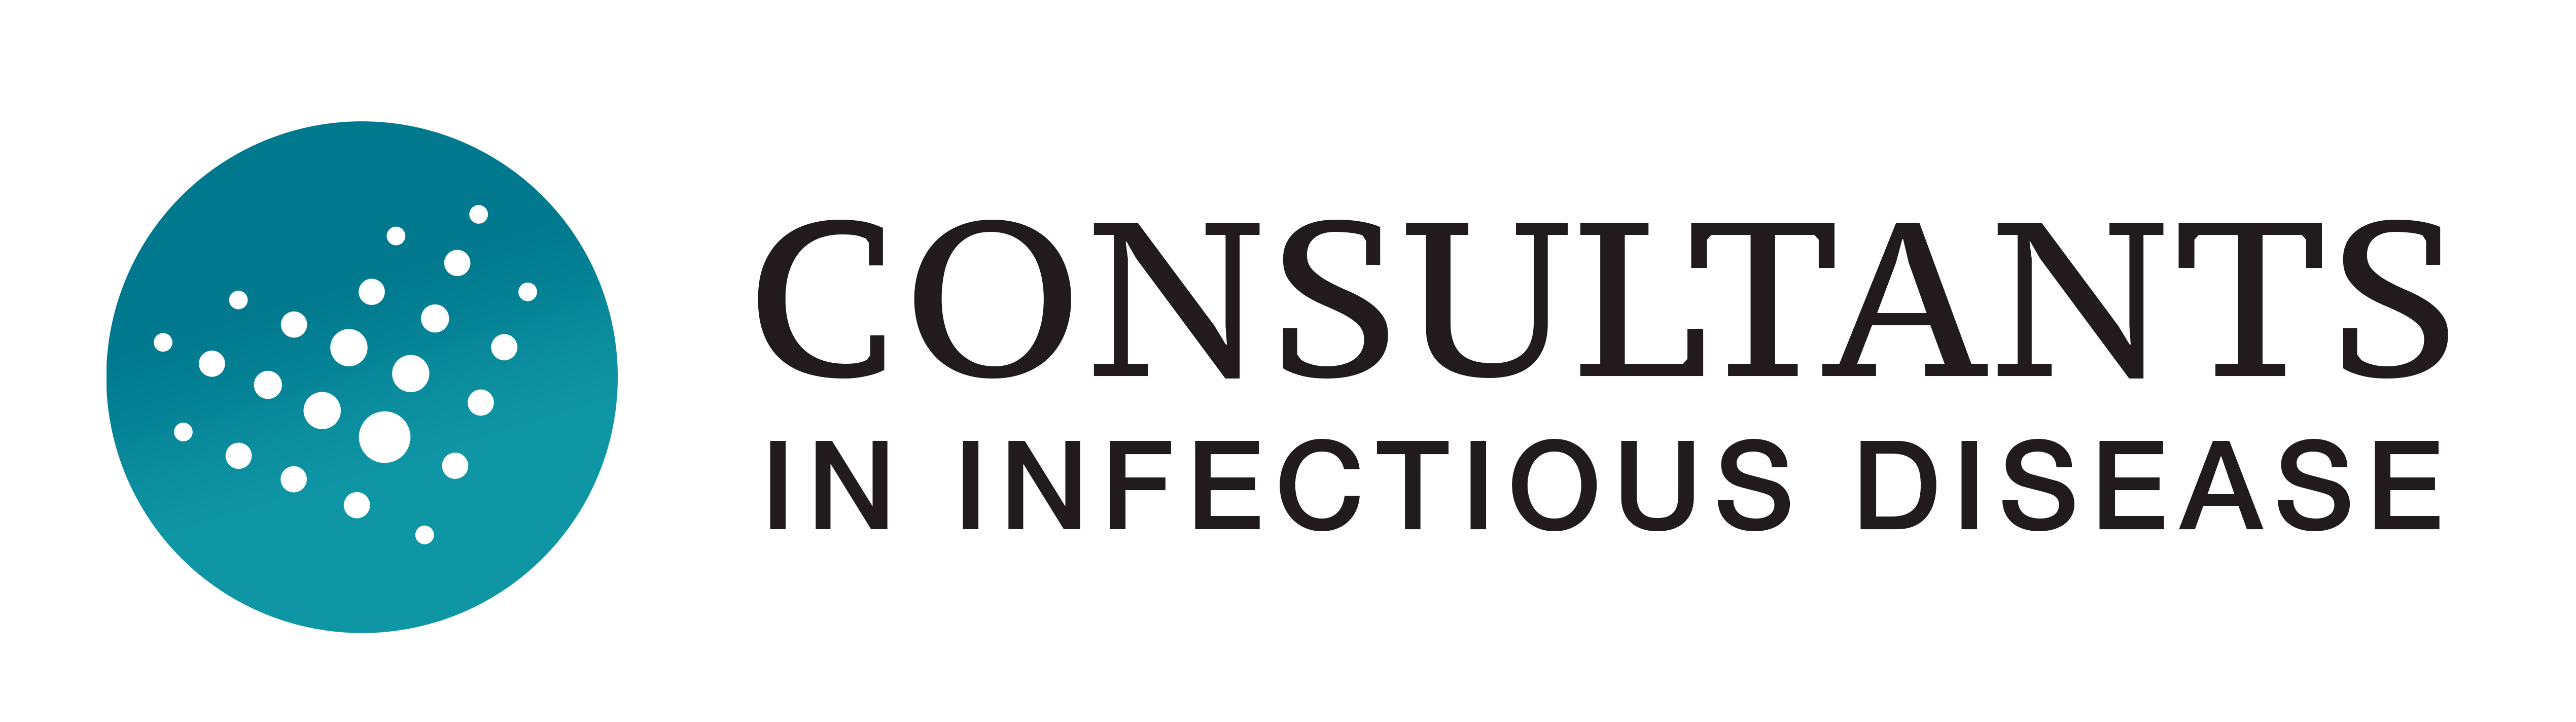 Consultants in Infectious Disease